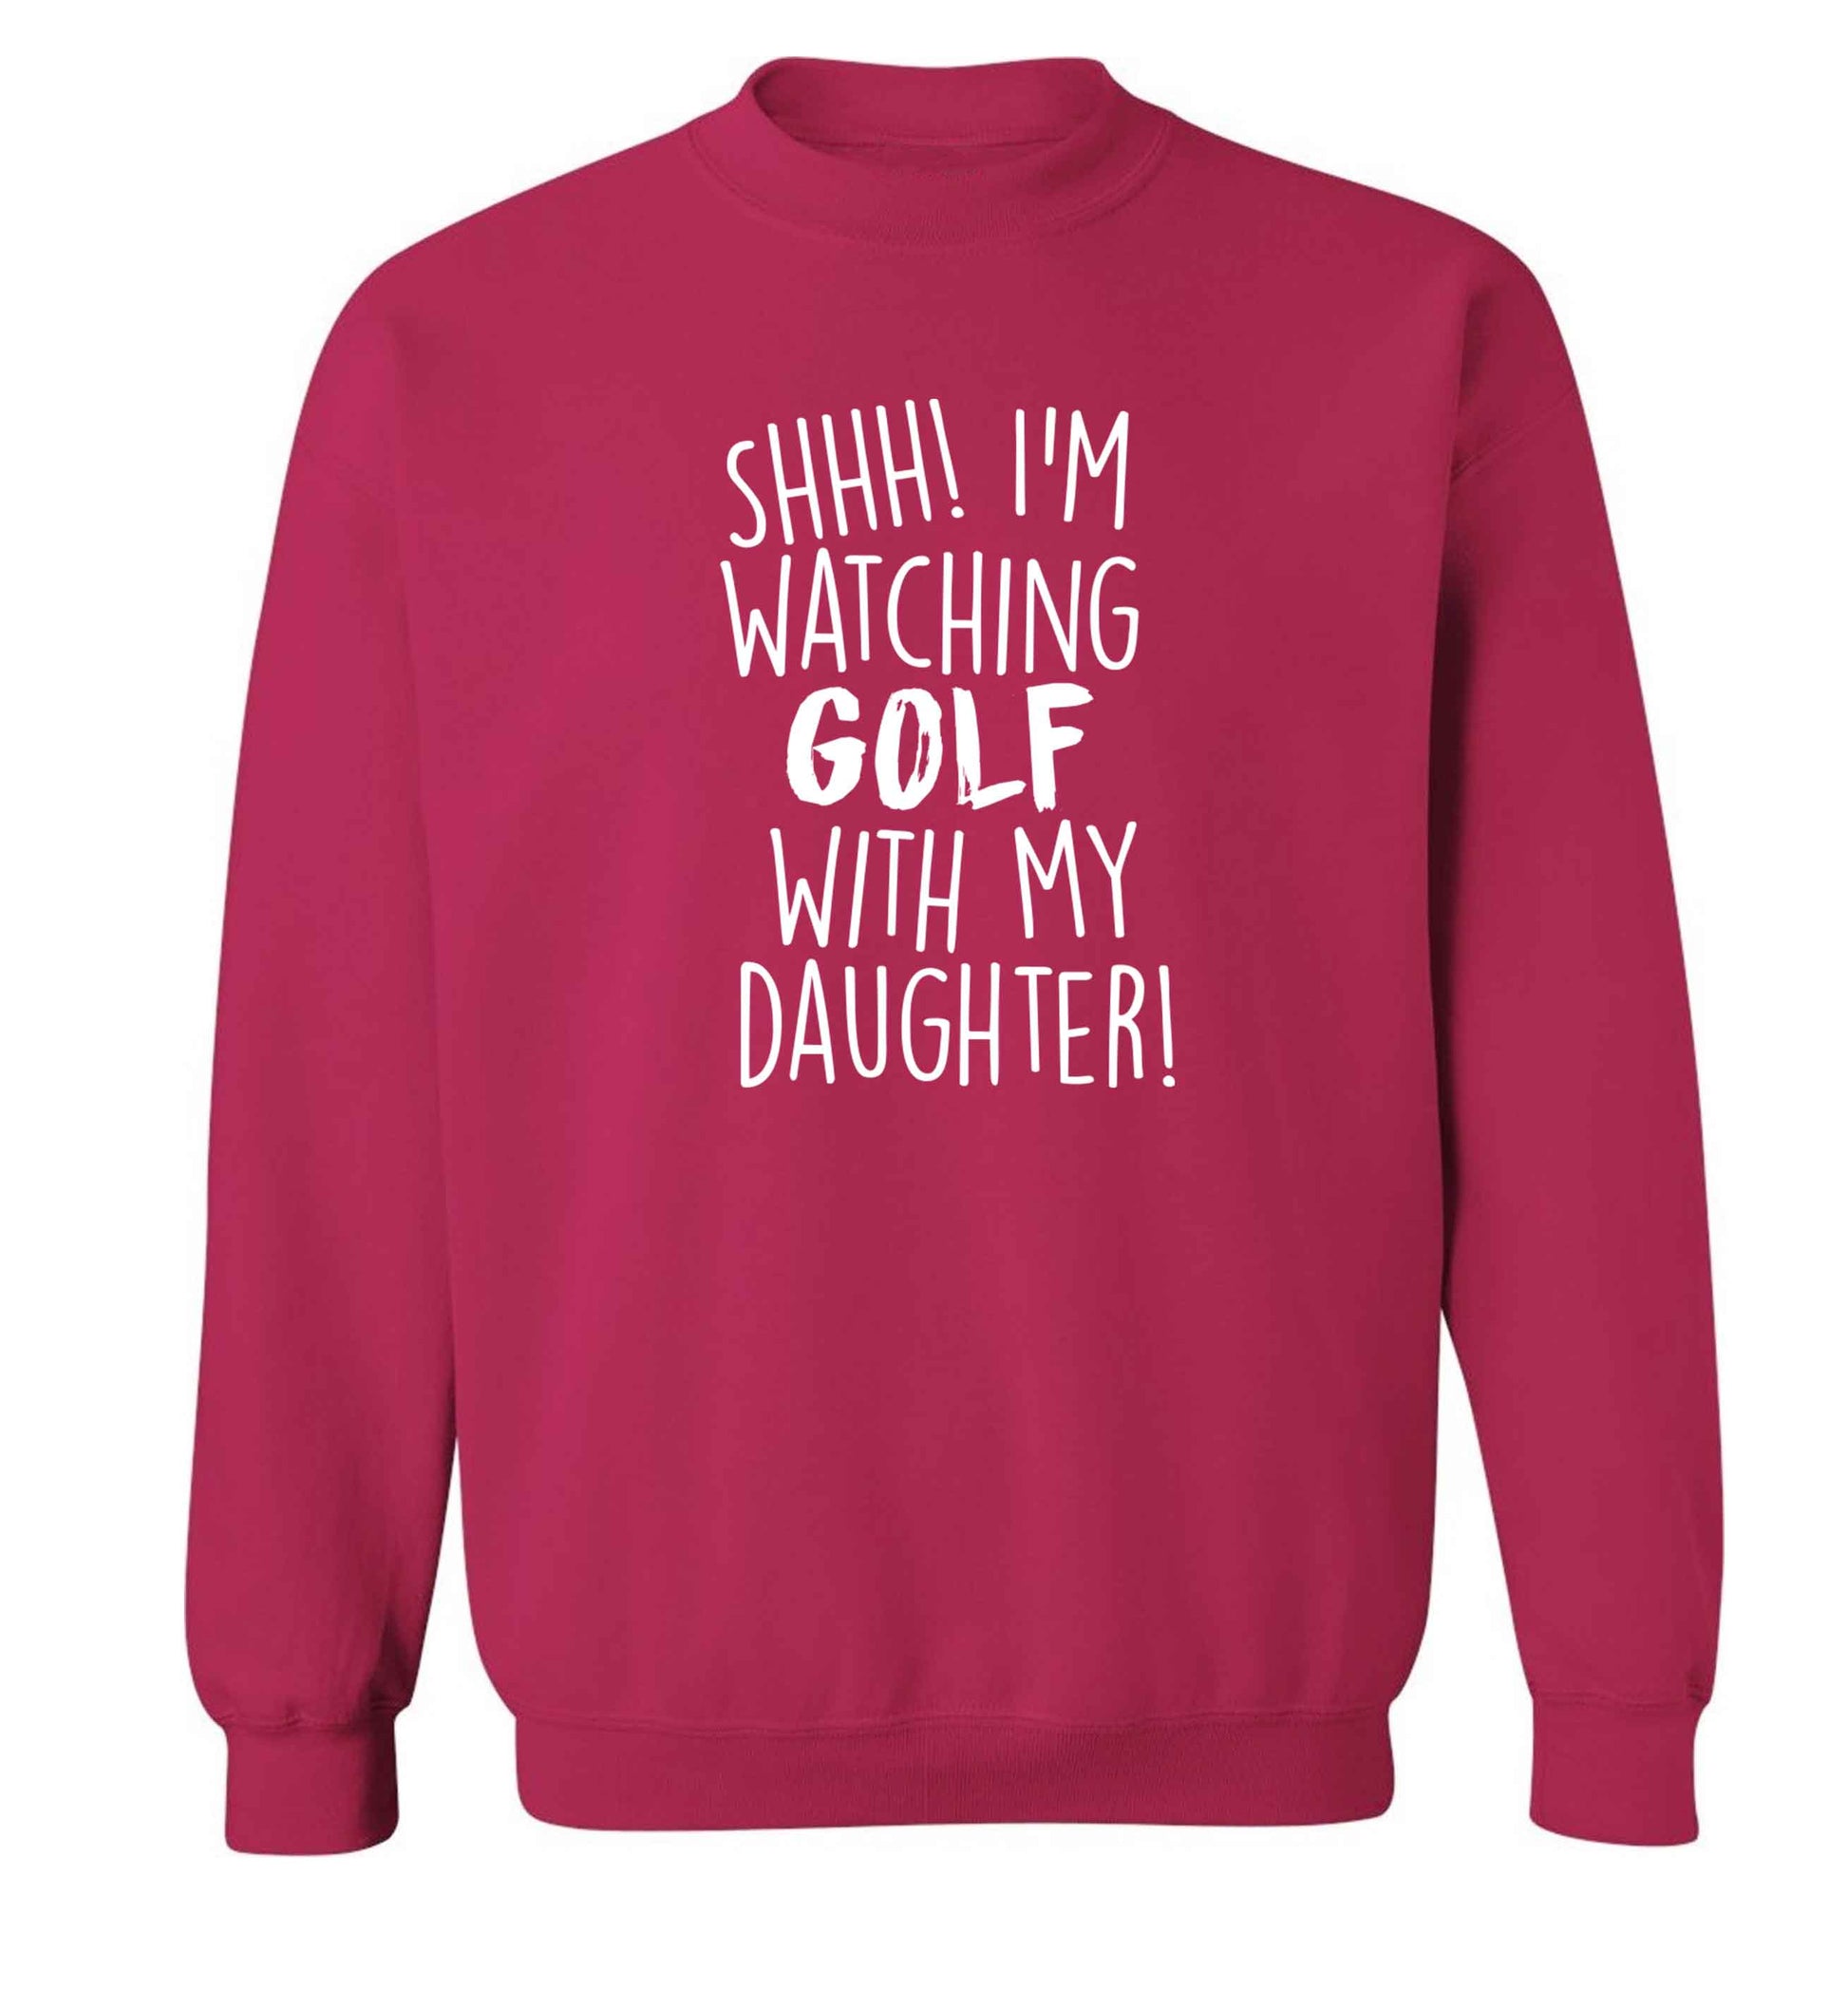 Shh I'm watching golf with my daughter Adult's unisex pink Sweater 2XL